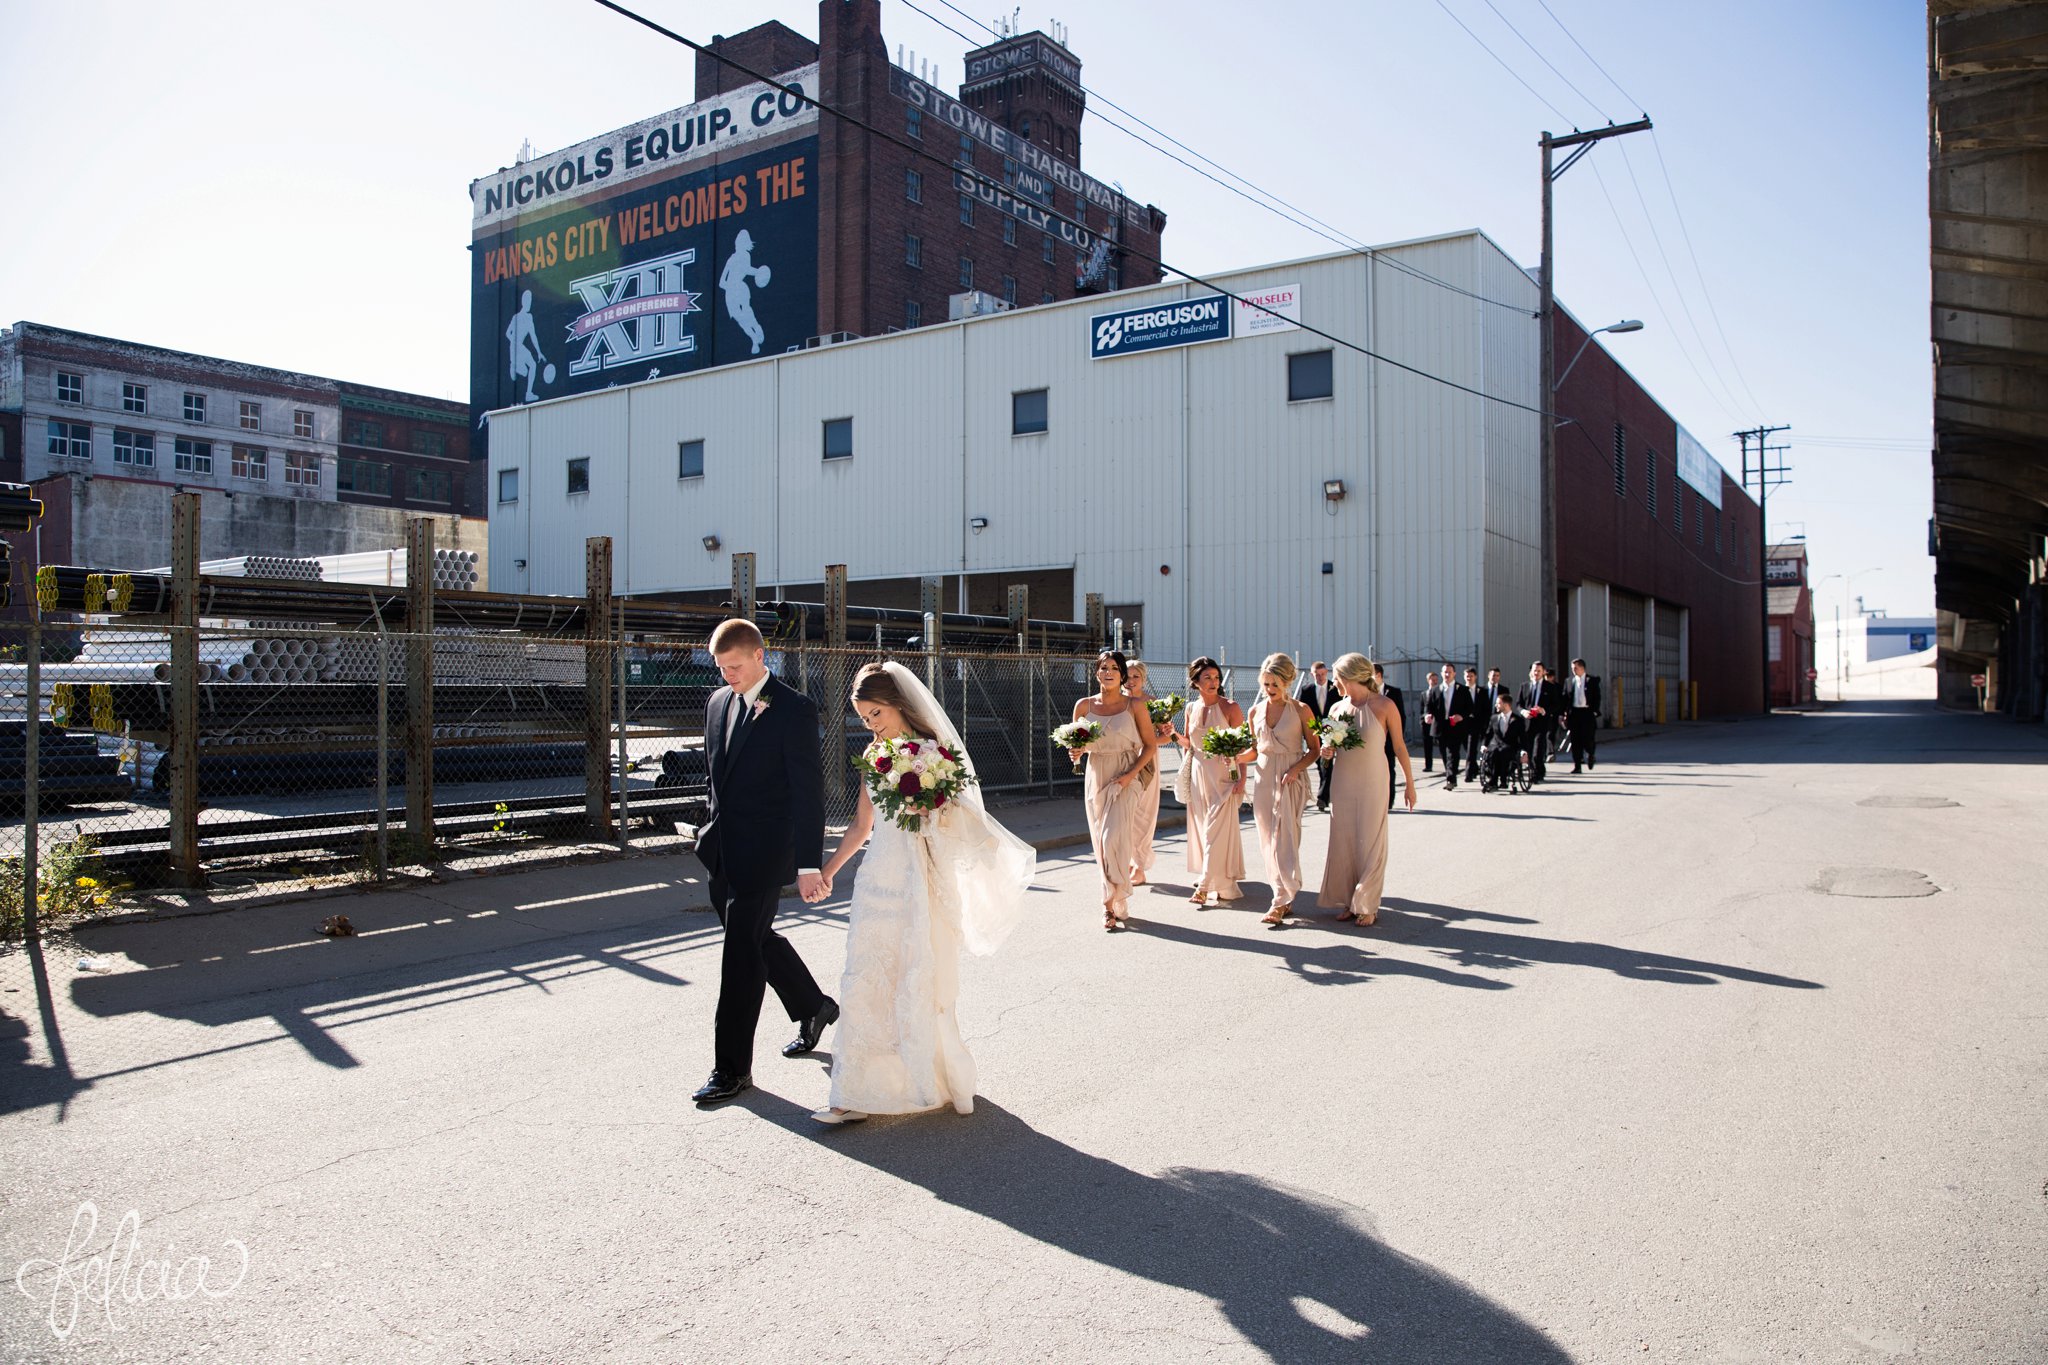 wedding | wedding photos | industrial | Rumely Event Space | wedding photography | images by feliciathephotographer.com | West Bottoms | industrial background | bridal party portraits | hand in hand | candid | walking